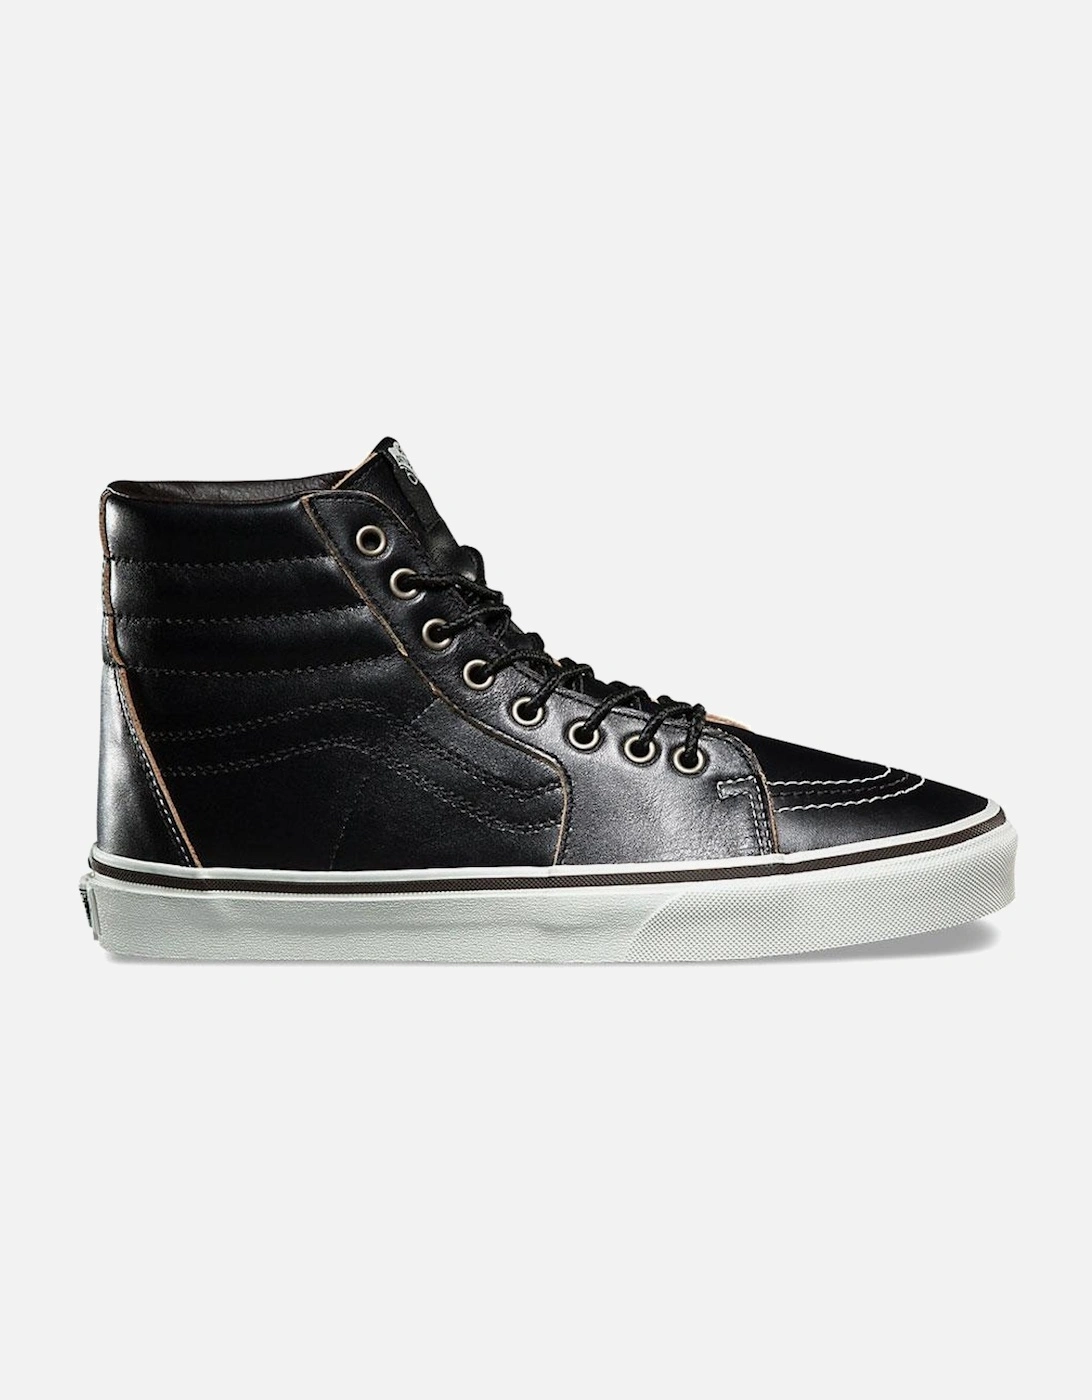 Sk8 Hi Ground Breakers Trainers - Black Marshmallow VN0A38GEOE6